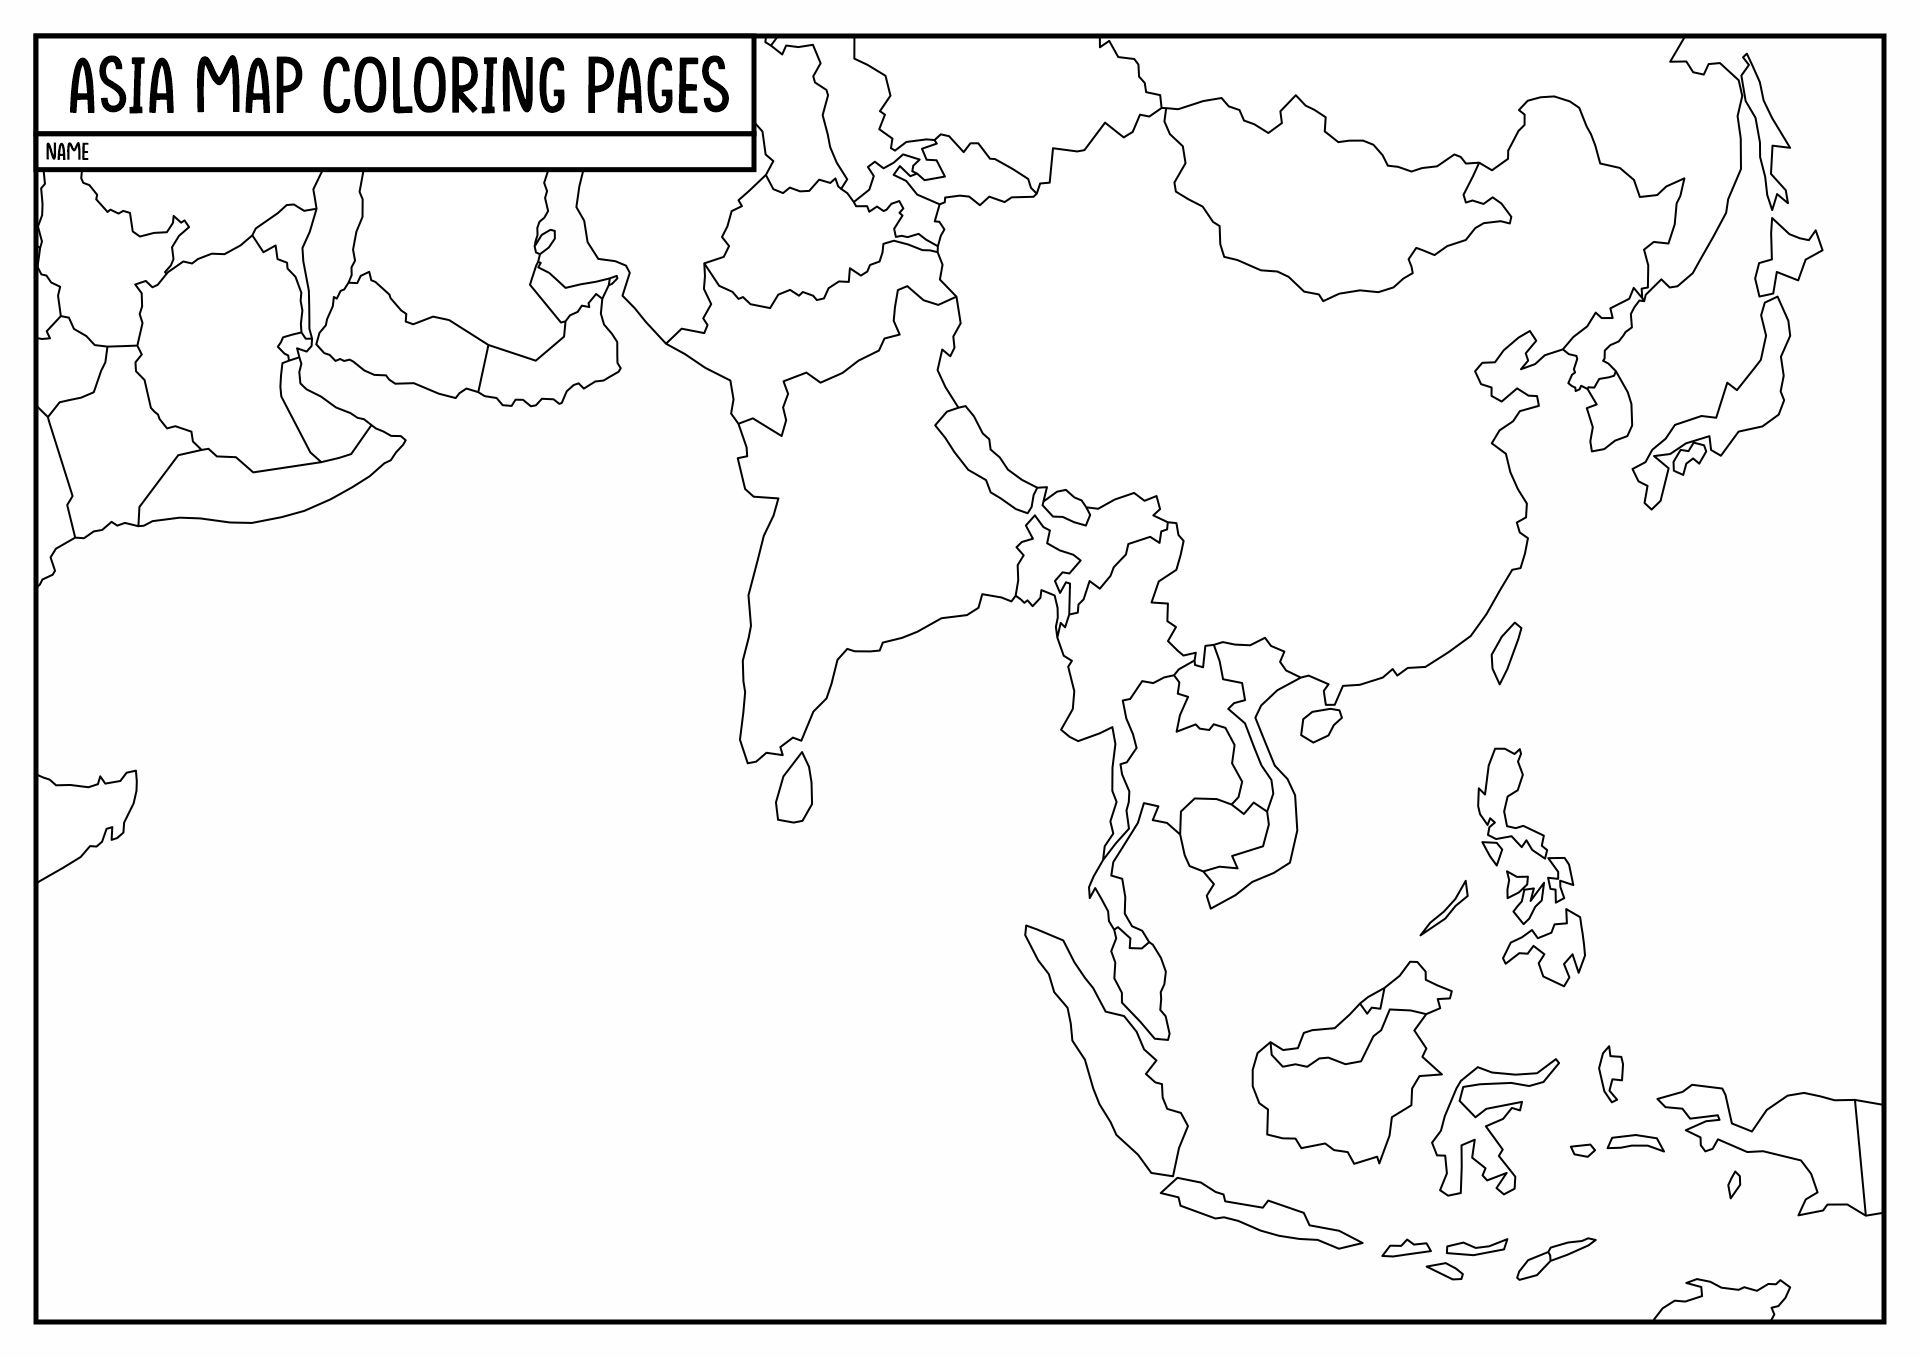 7 Best Images of Asia Blank Map Worksheets Printable Blank Asia Map